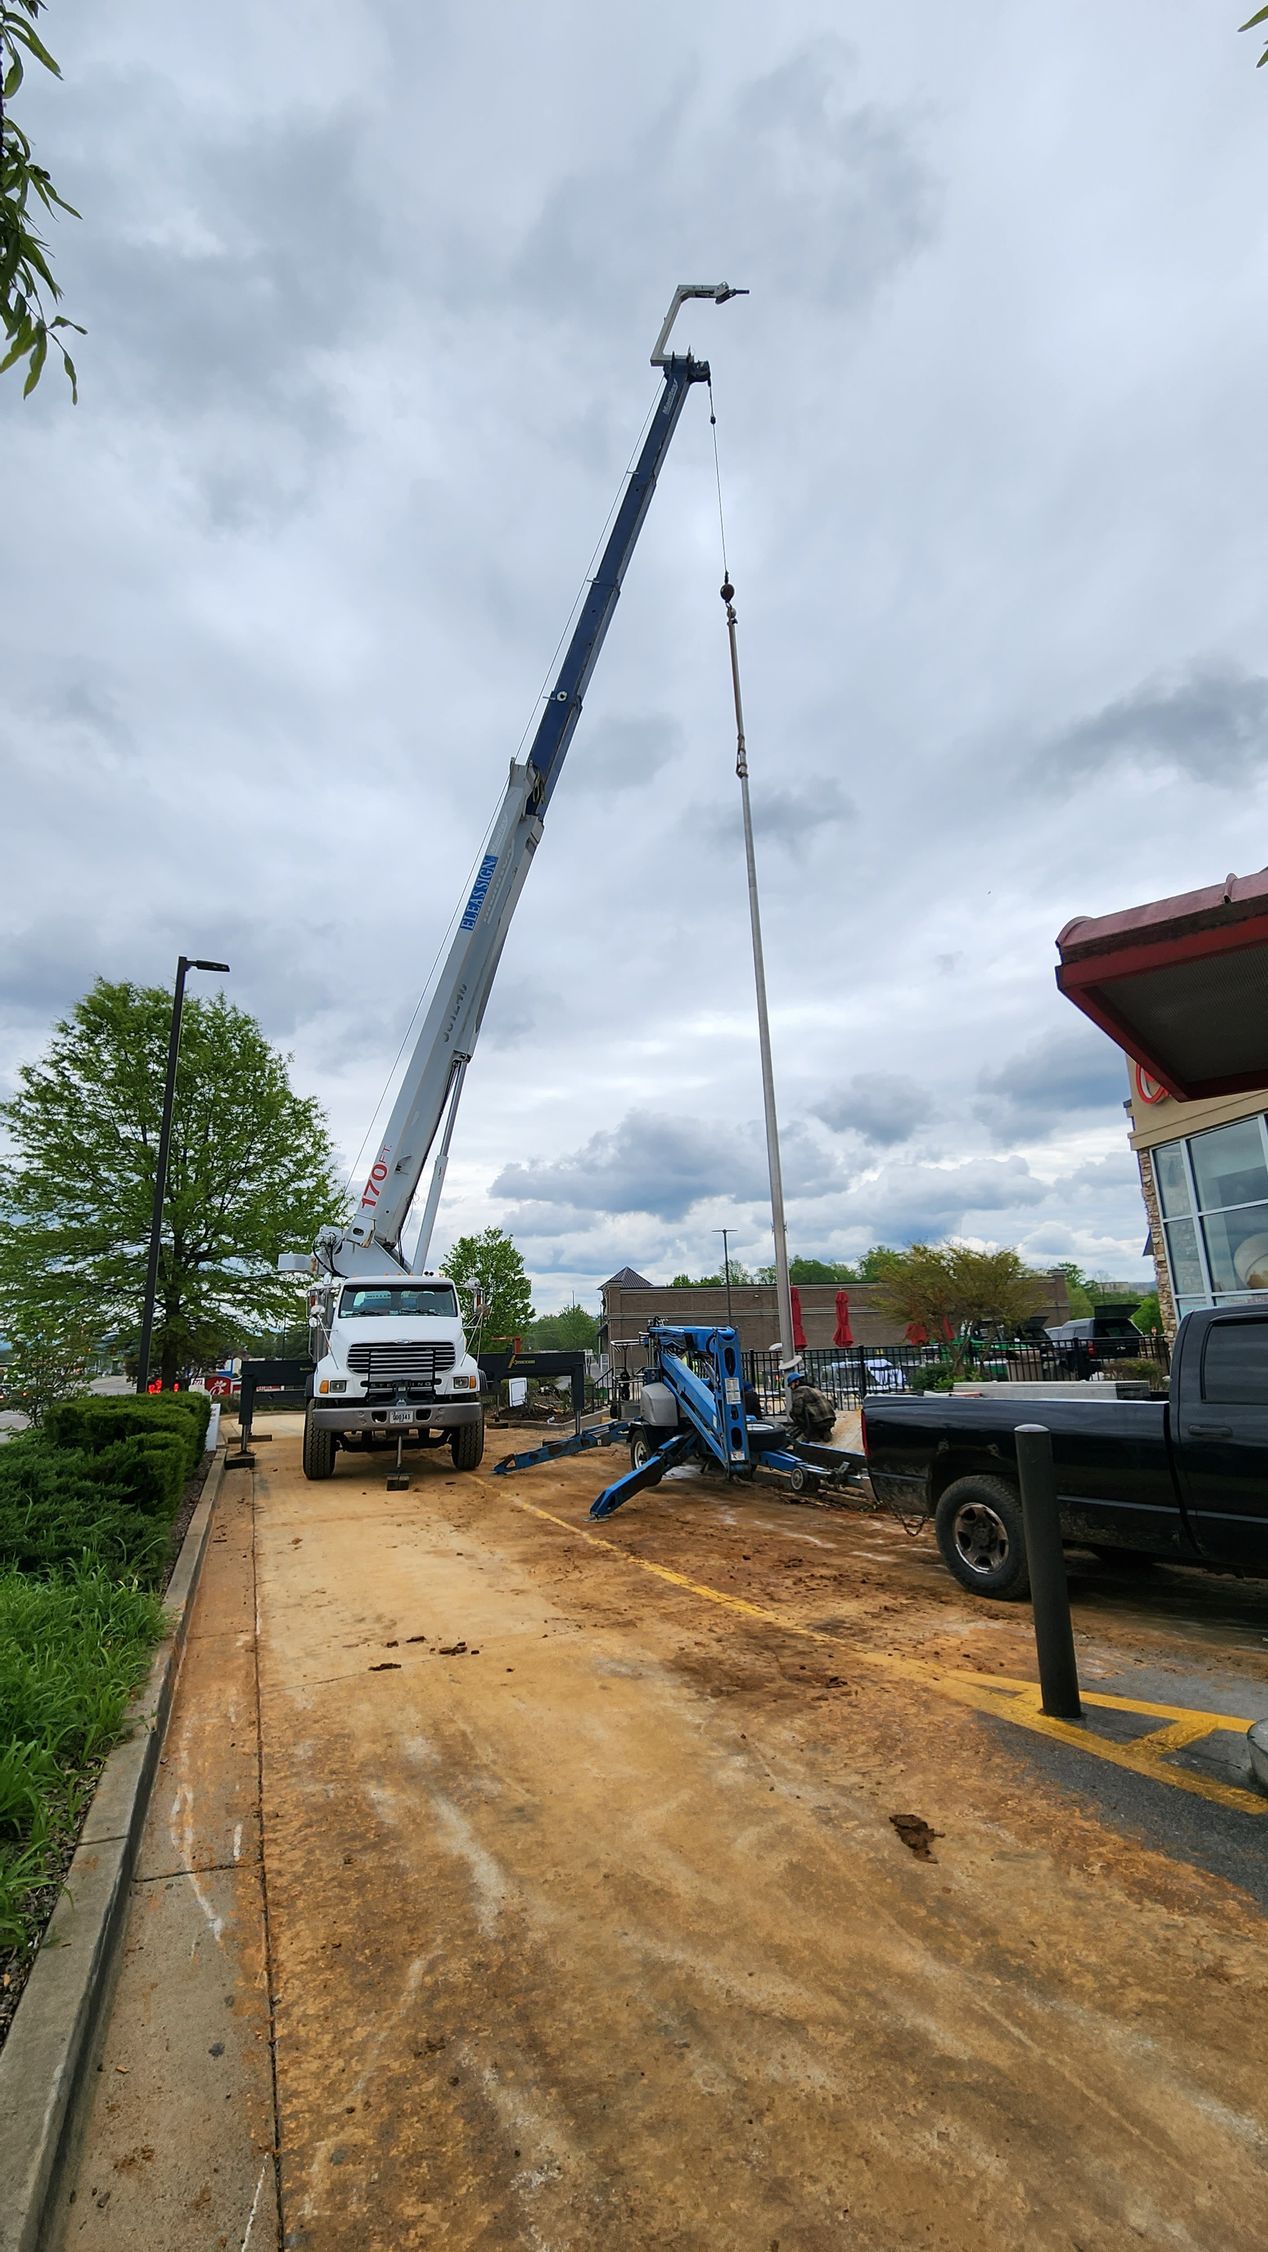 A mcdonald 's sign is being worked on by a crane